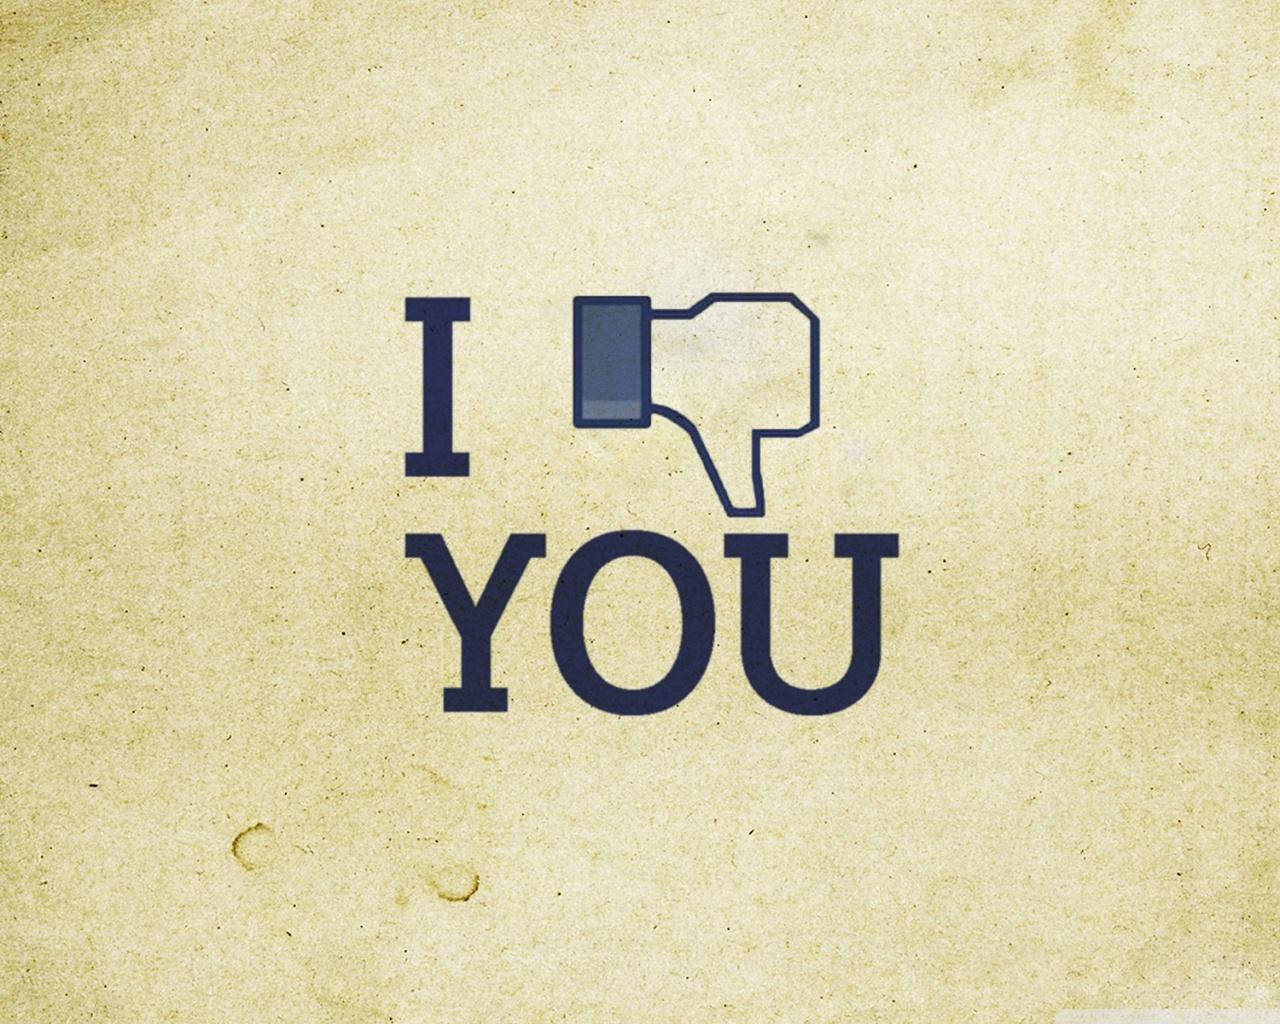 I Hate You With Thumbs Down Wallpaper